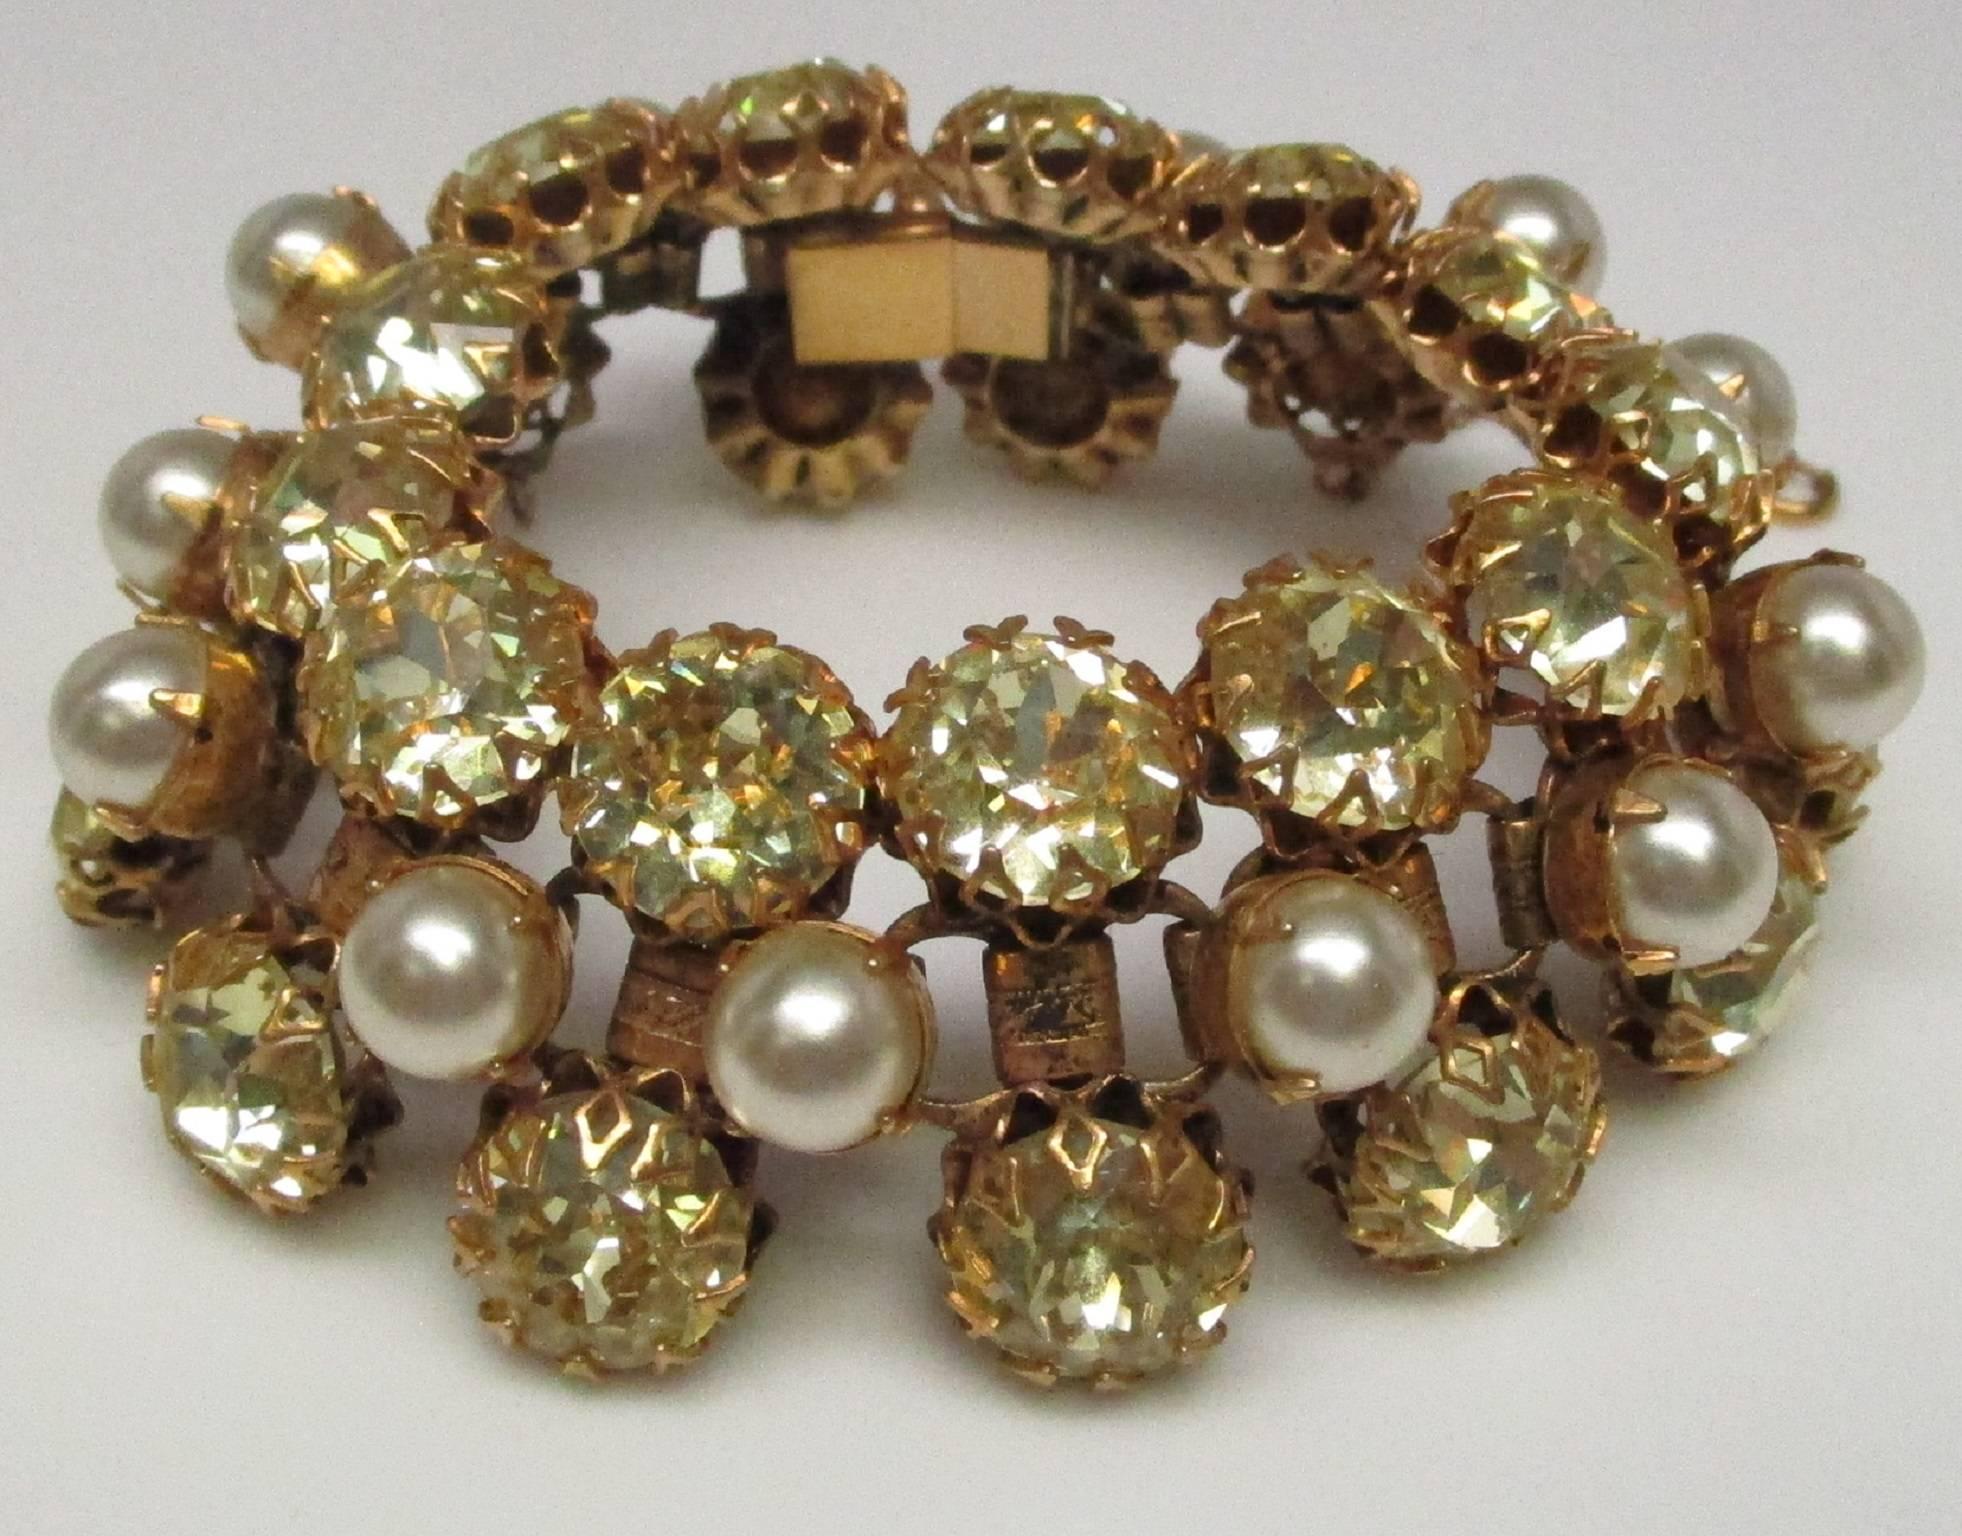 This is a Schreiner of New York bright, beautiful rhinestone and faux pearl bracelet. It was made circa 1940. It is excellent condition with all stones intact. This bracelet Gives you the eye catching look without the worries that would be